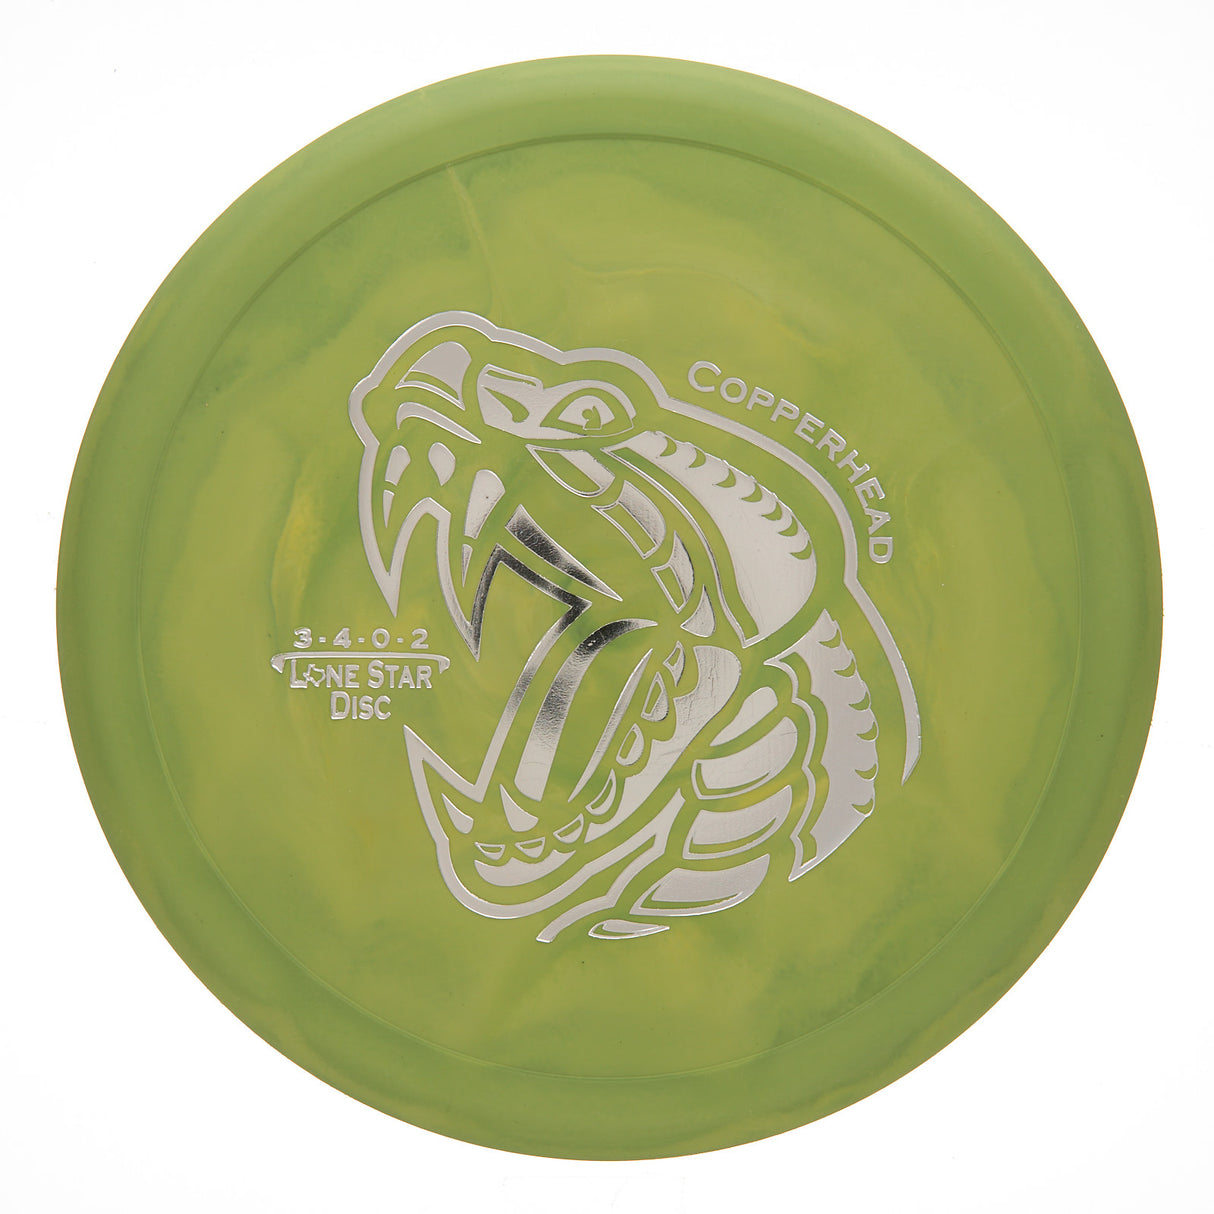 Lone Star Disc Copperhead - Artist Series Victor 2 170g | Style 0003